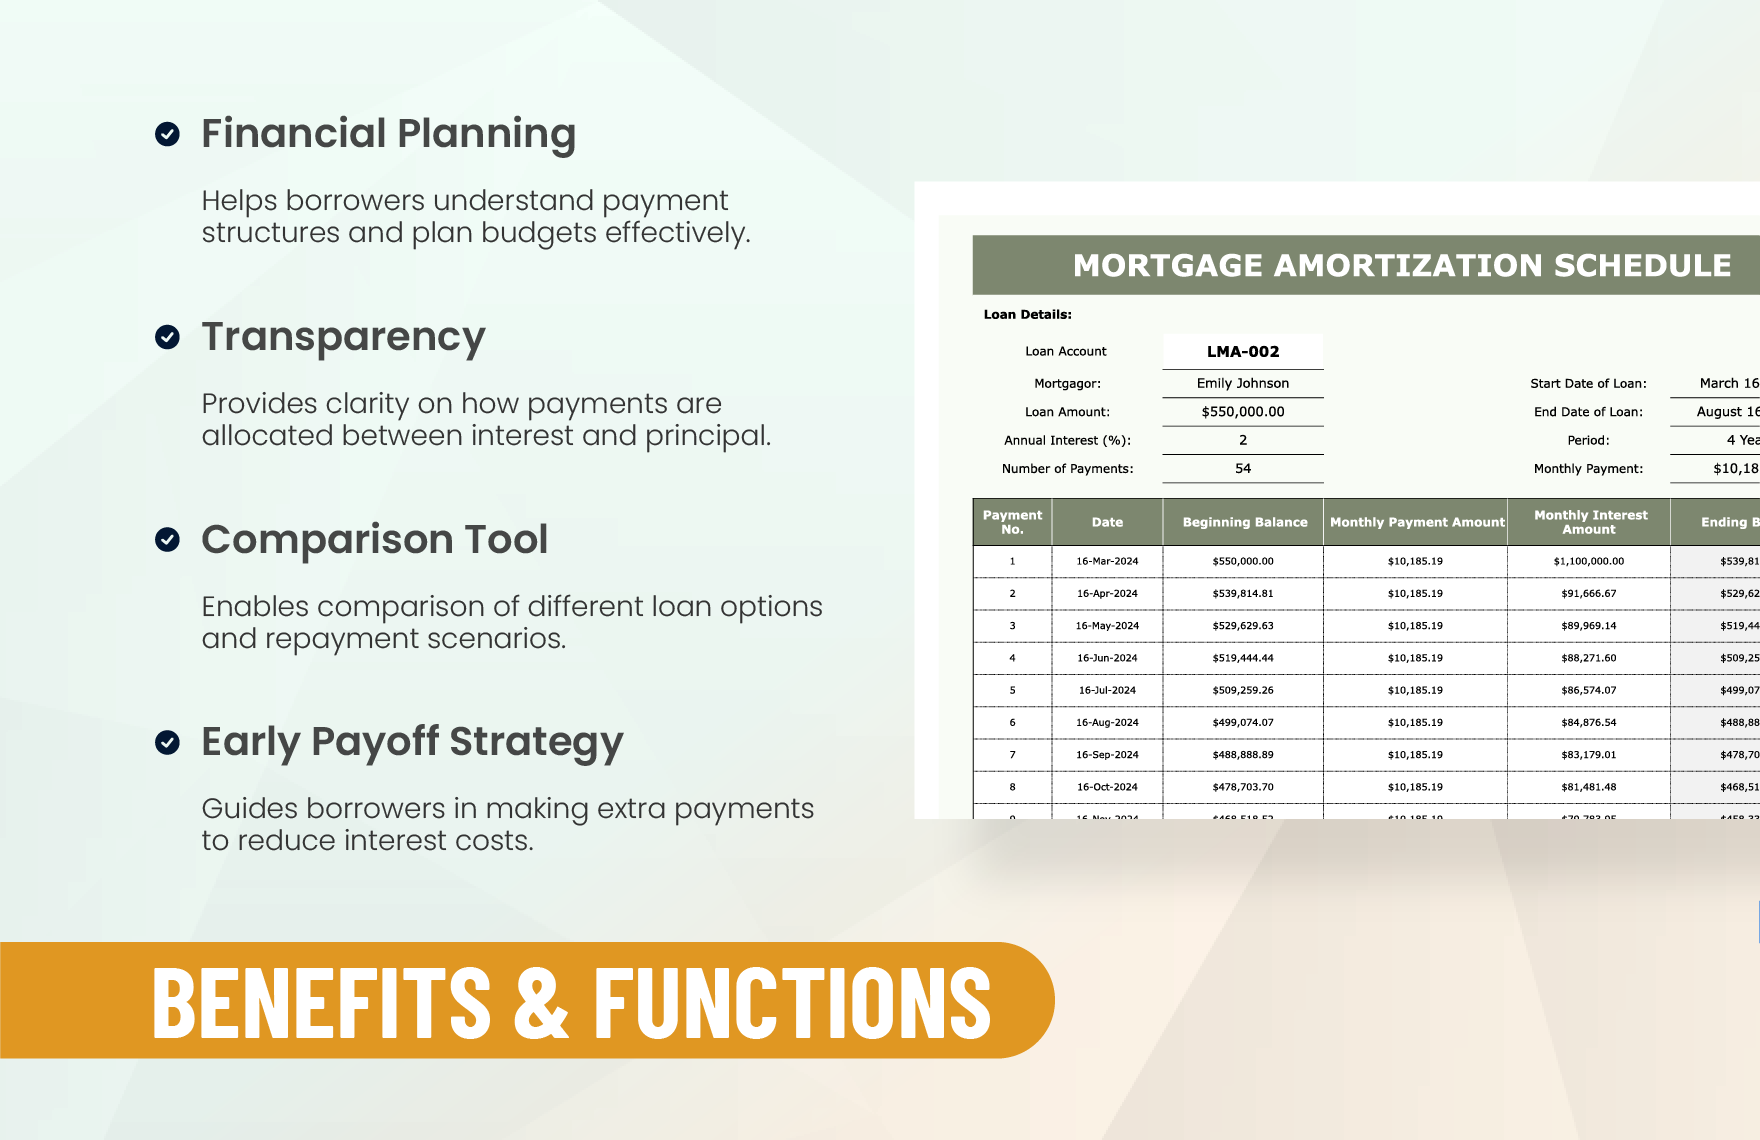 Mortgage Amortization Schedule Template